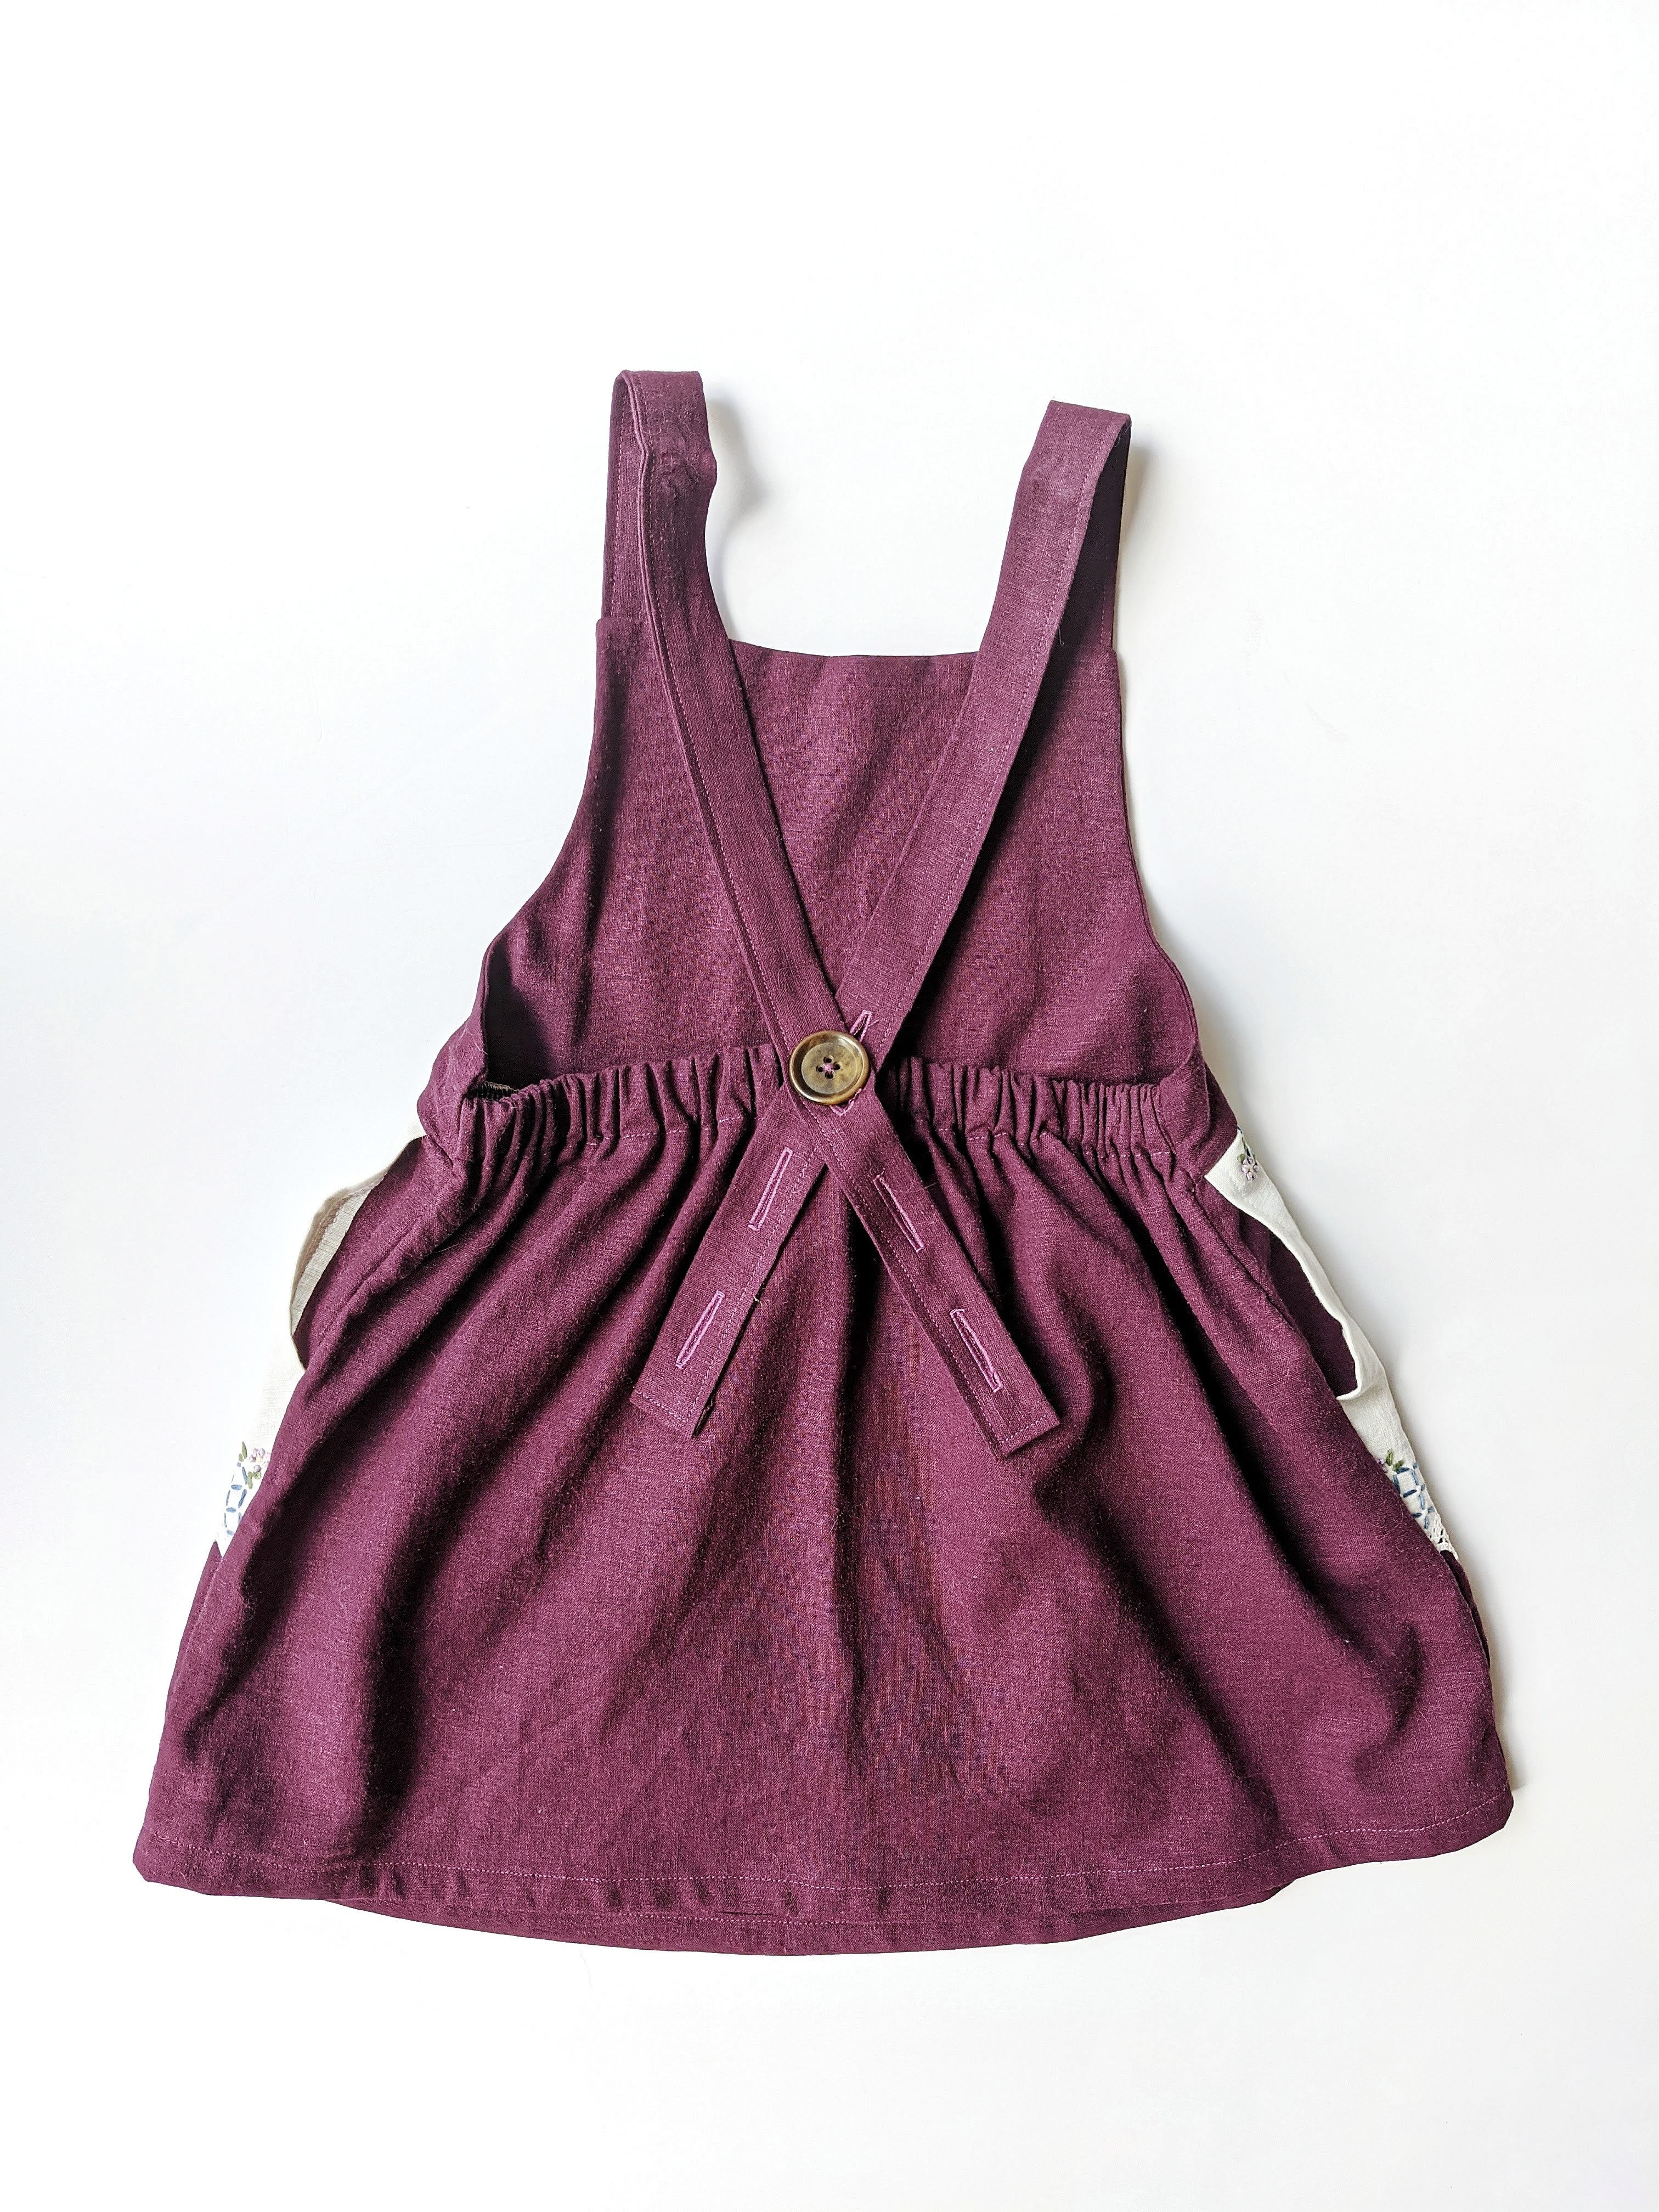 Embroidered Pocket Pinafore Dress- Size 4/5T